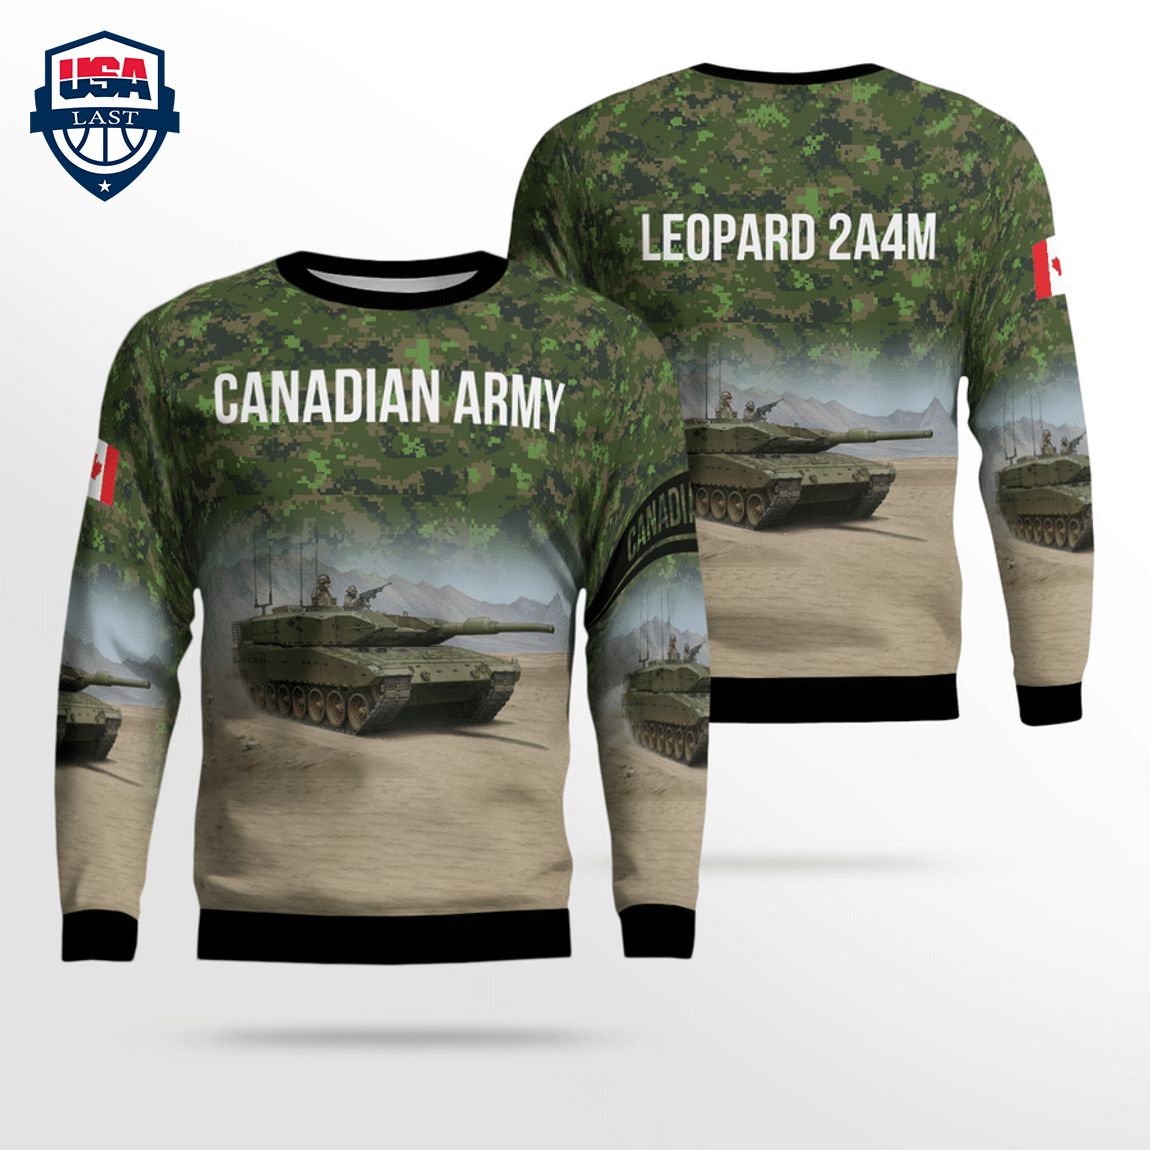 Canadian Army Leopard 2A4M 3D Christmas Sweater